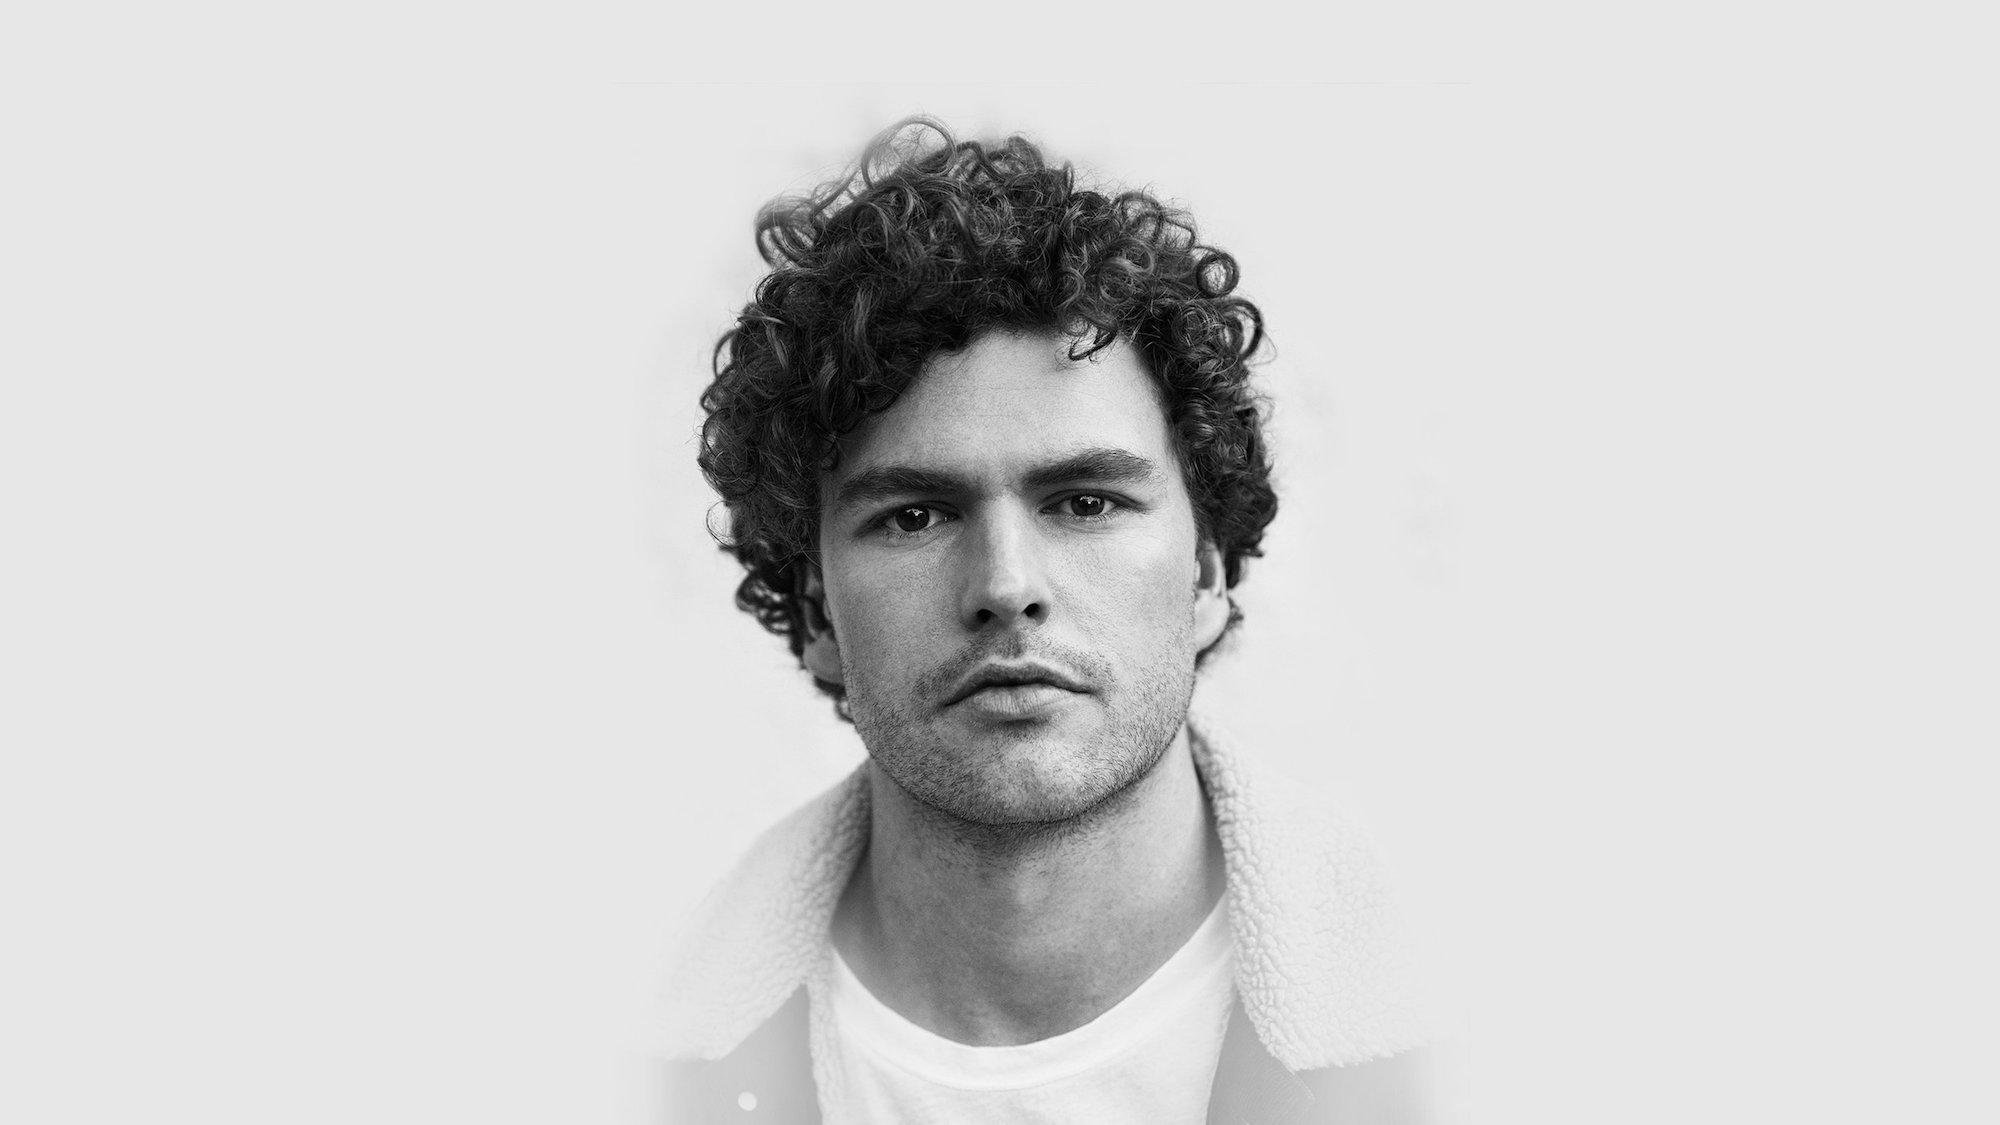 triple j adds Vance Joy and GLADES to the playlist